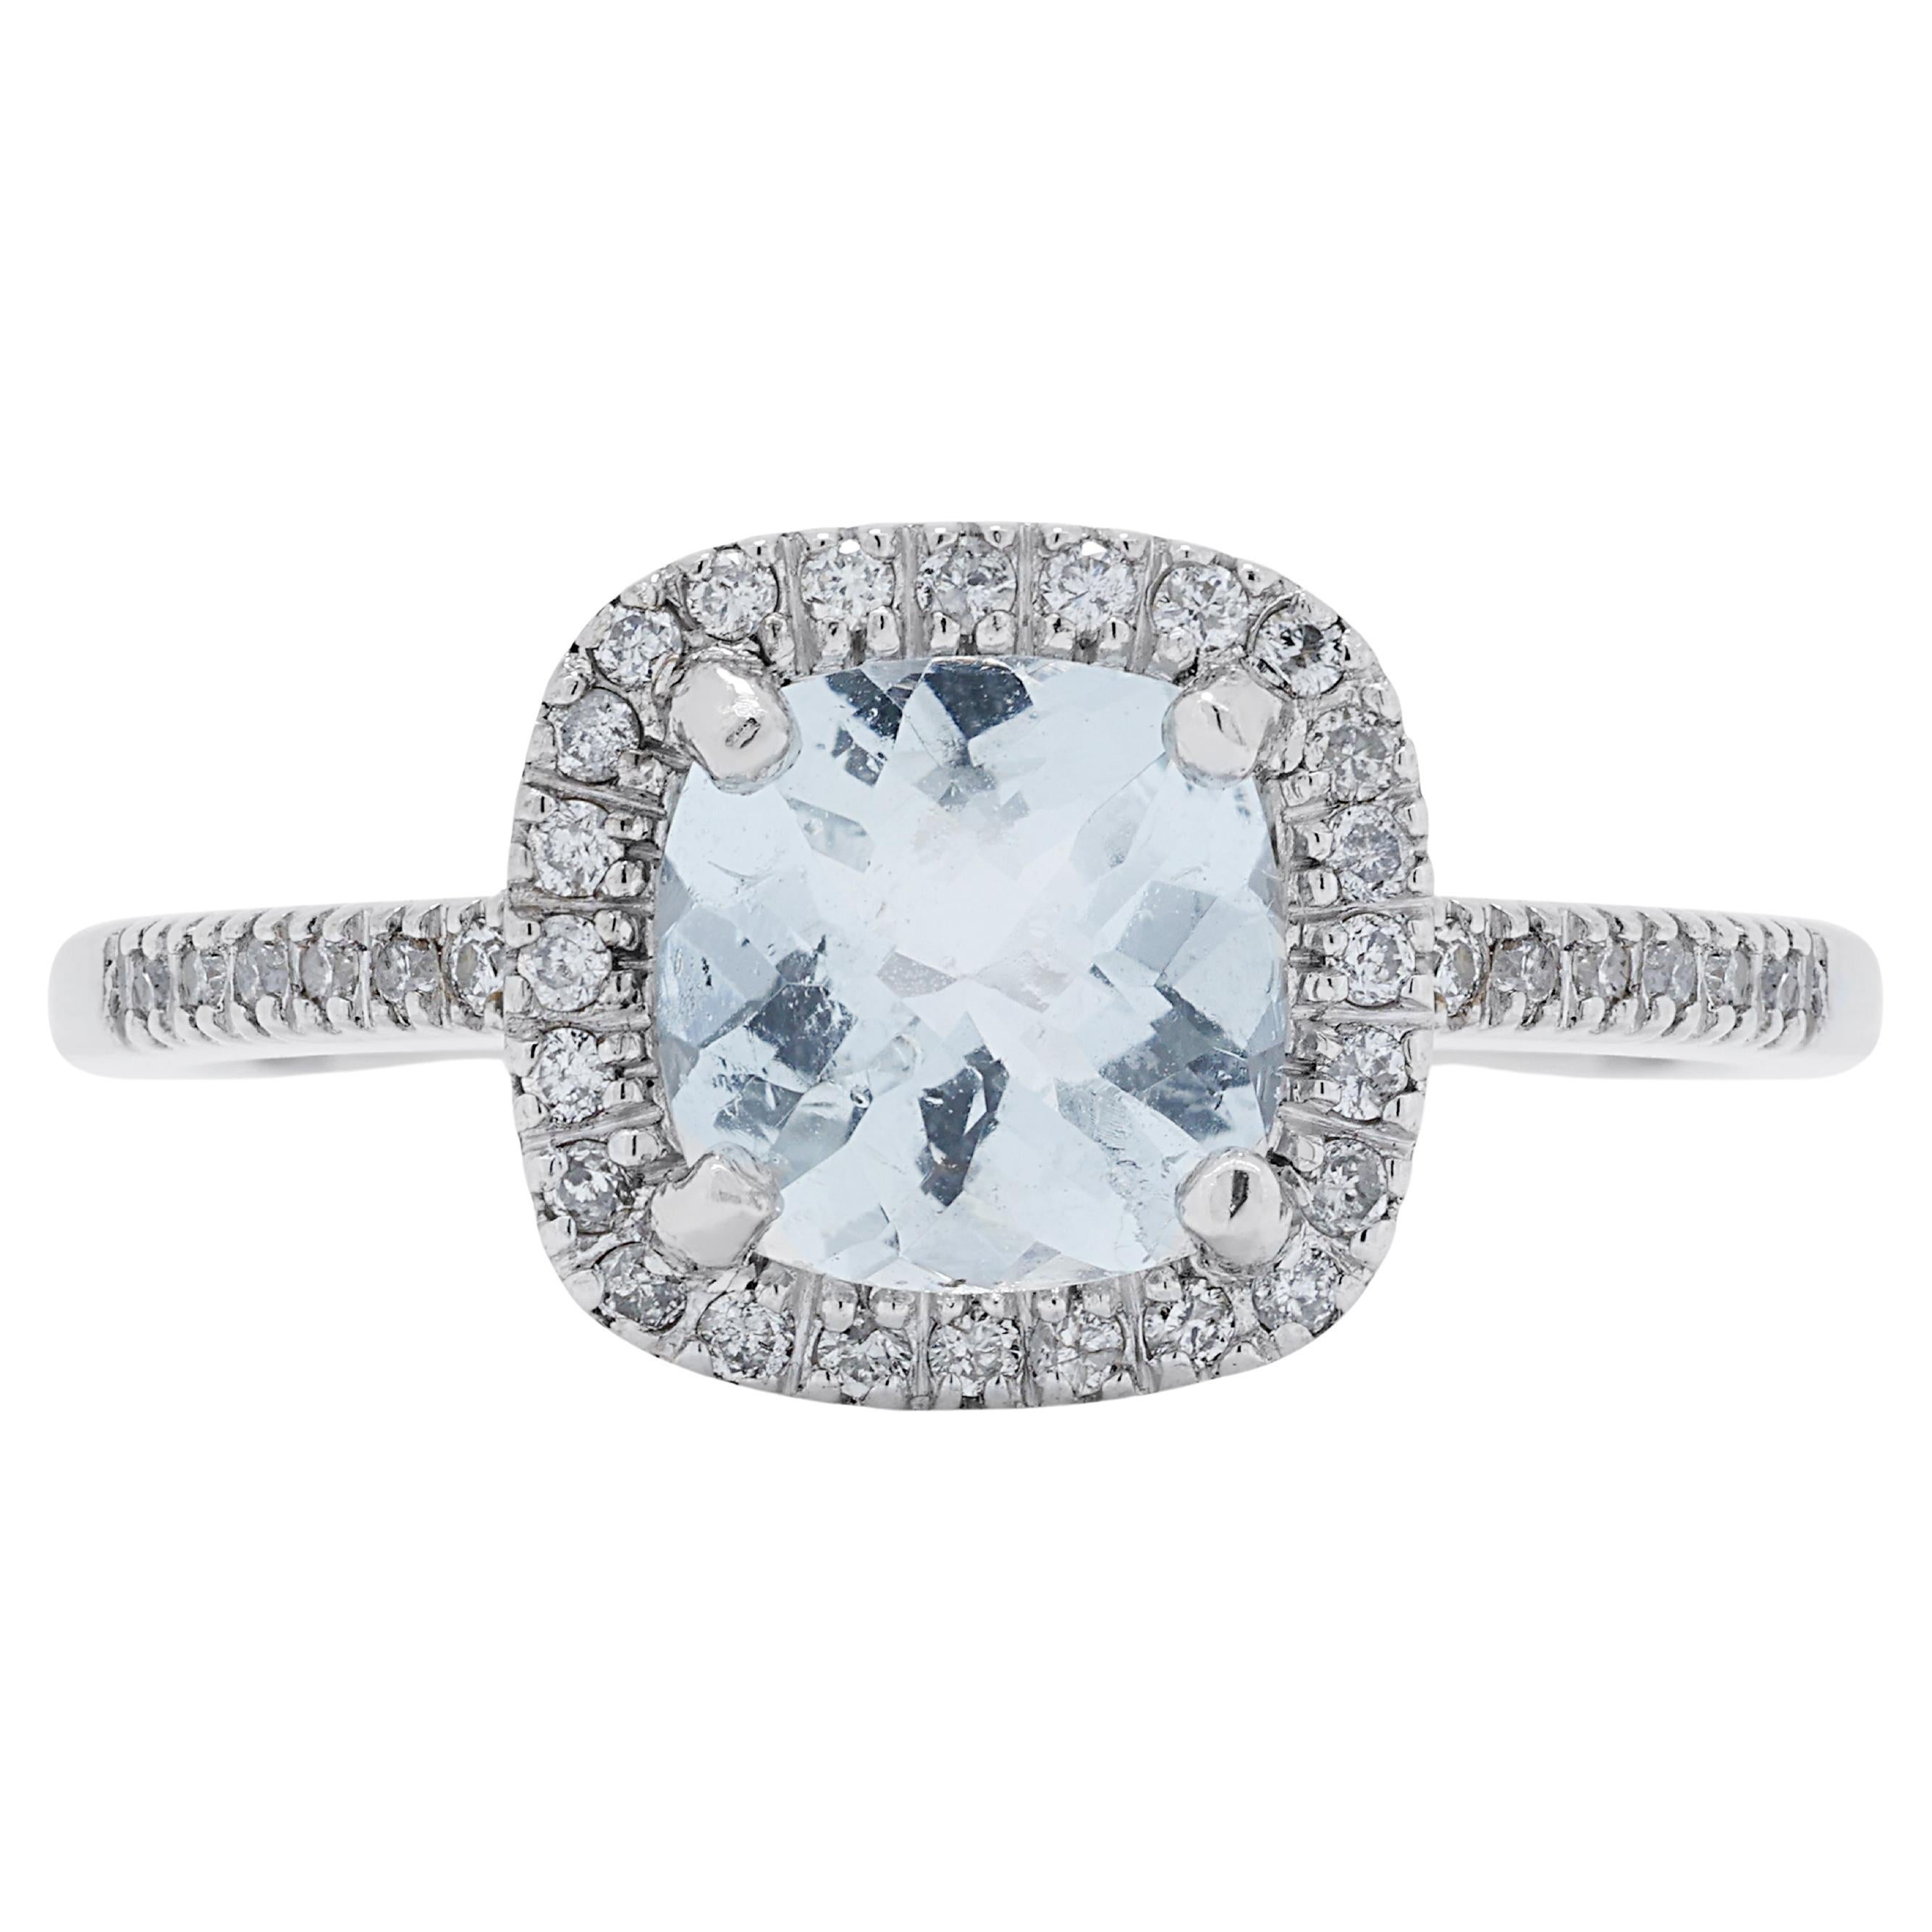 Enchanting 1.27ct Aquamarine Pave Ring with Side Diamonds in 14K White Gold